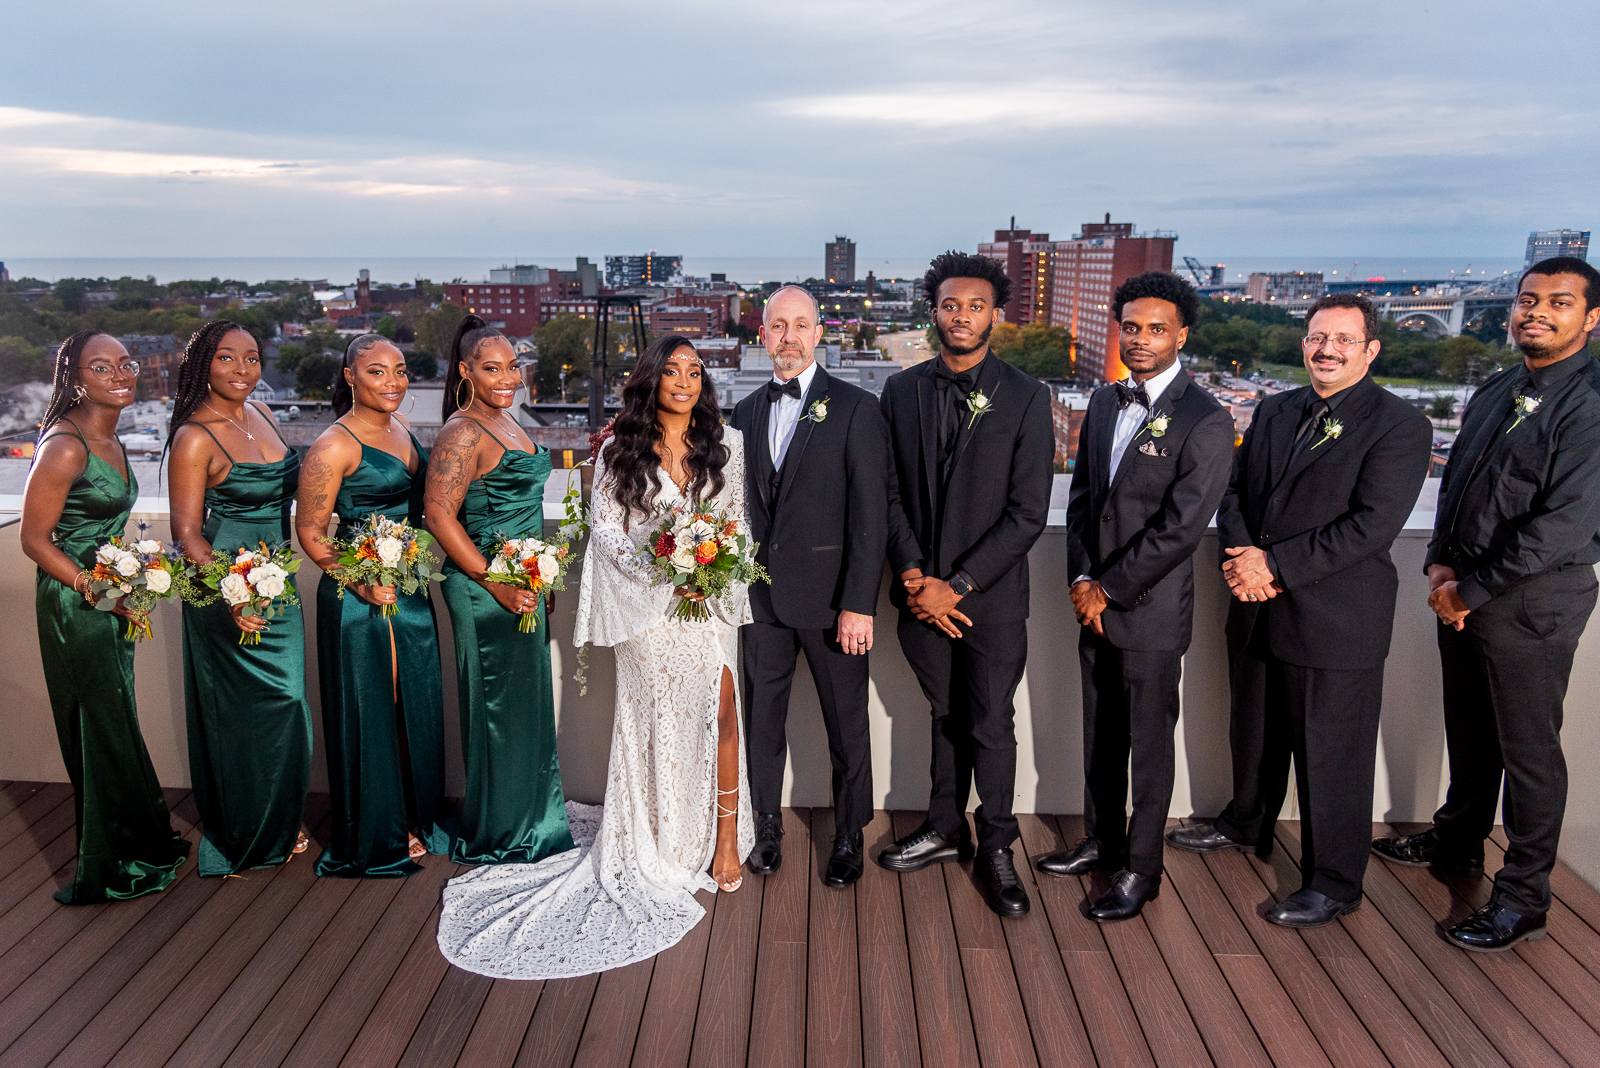 Bride and groom with bridal party, bridal party portrait, African American bride, African American wedding, sunset wedding photo, downtown Cleveland skyline, Lake Erie, urban wedding ceremony at Penthouse Events, Ohio City, Cleveland Flats